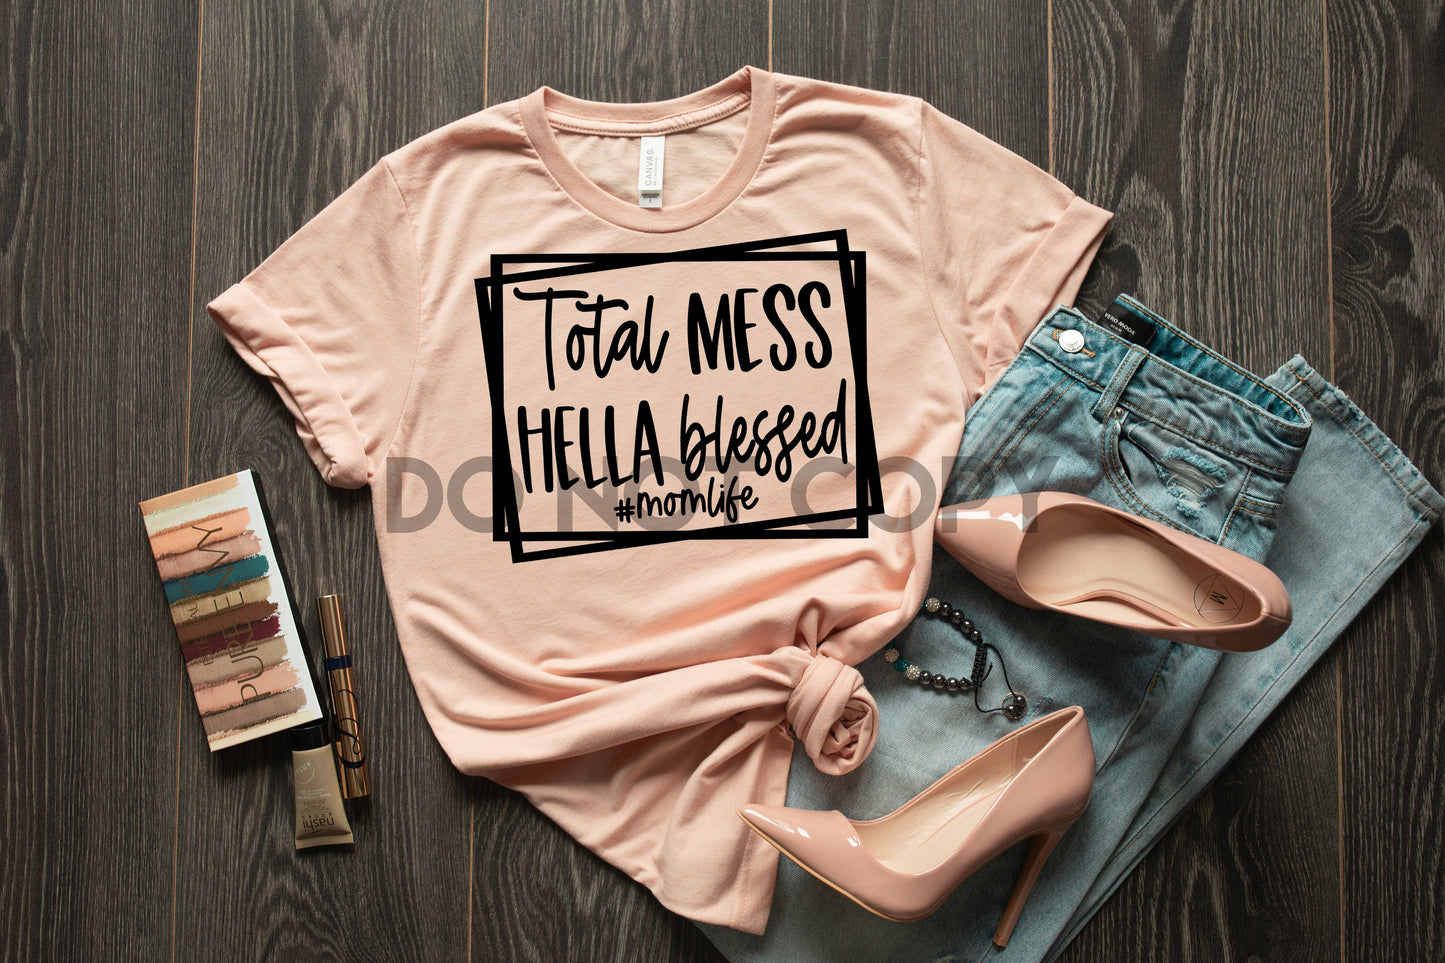 Total mess Hella Blessed MOM LIFE #momlife one color Screen print transfer